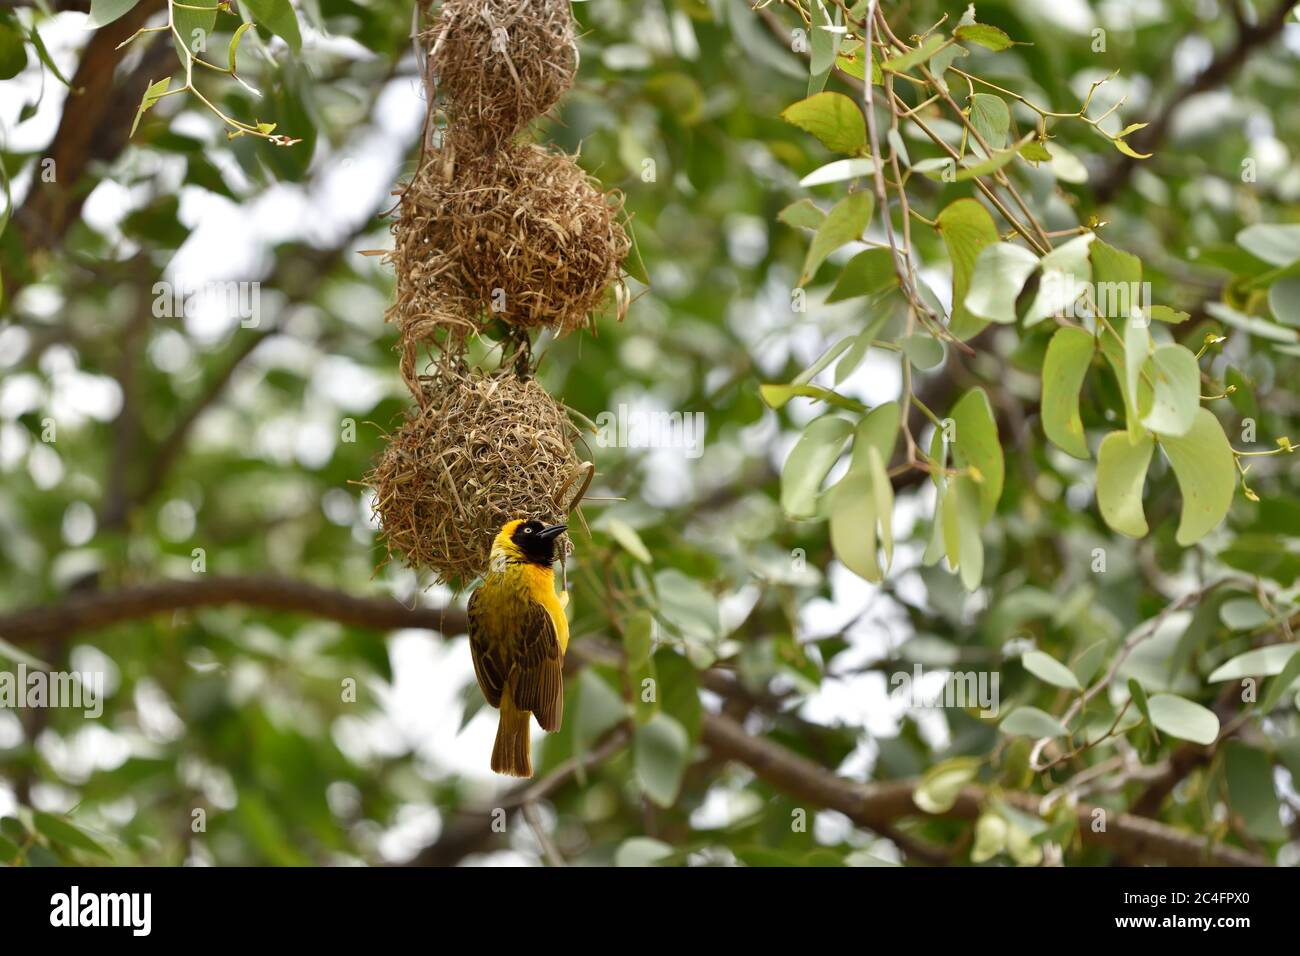 Southern Yellow Masked Weaver bird building a nest, Namibia, Africa Stock Photo